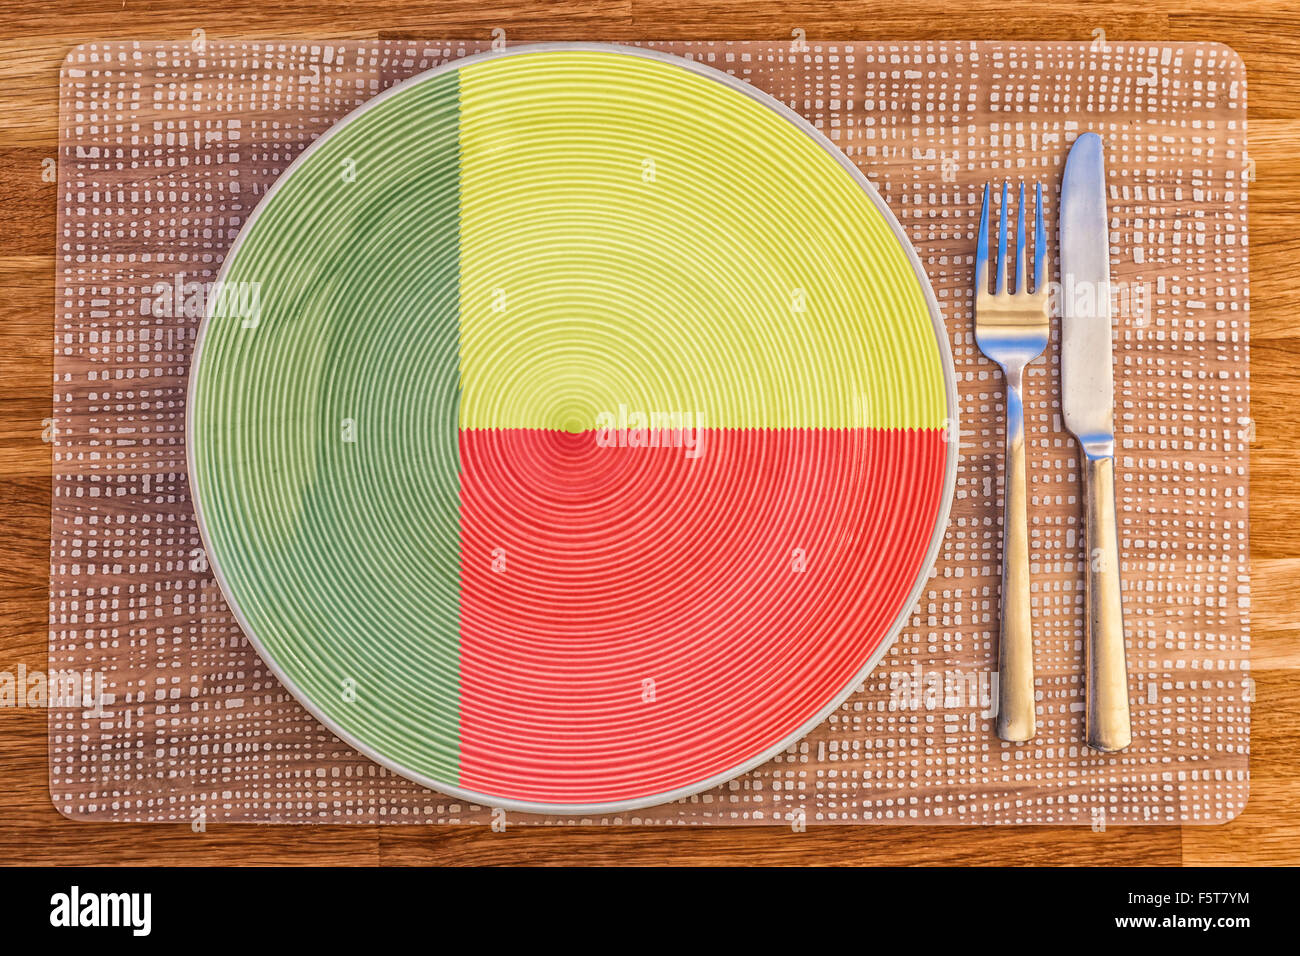 Dinner plate with the flag of Benin on it for your international food and drink concepts. Stock Photo